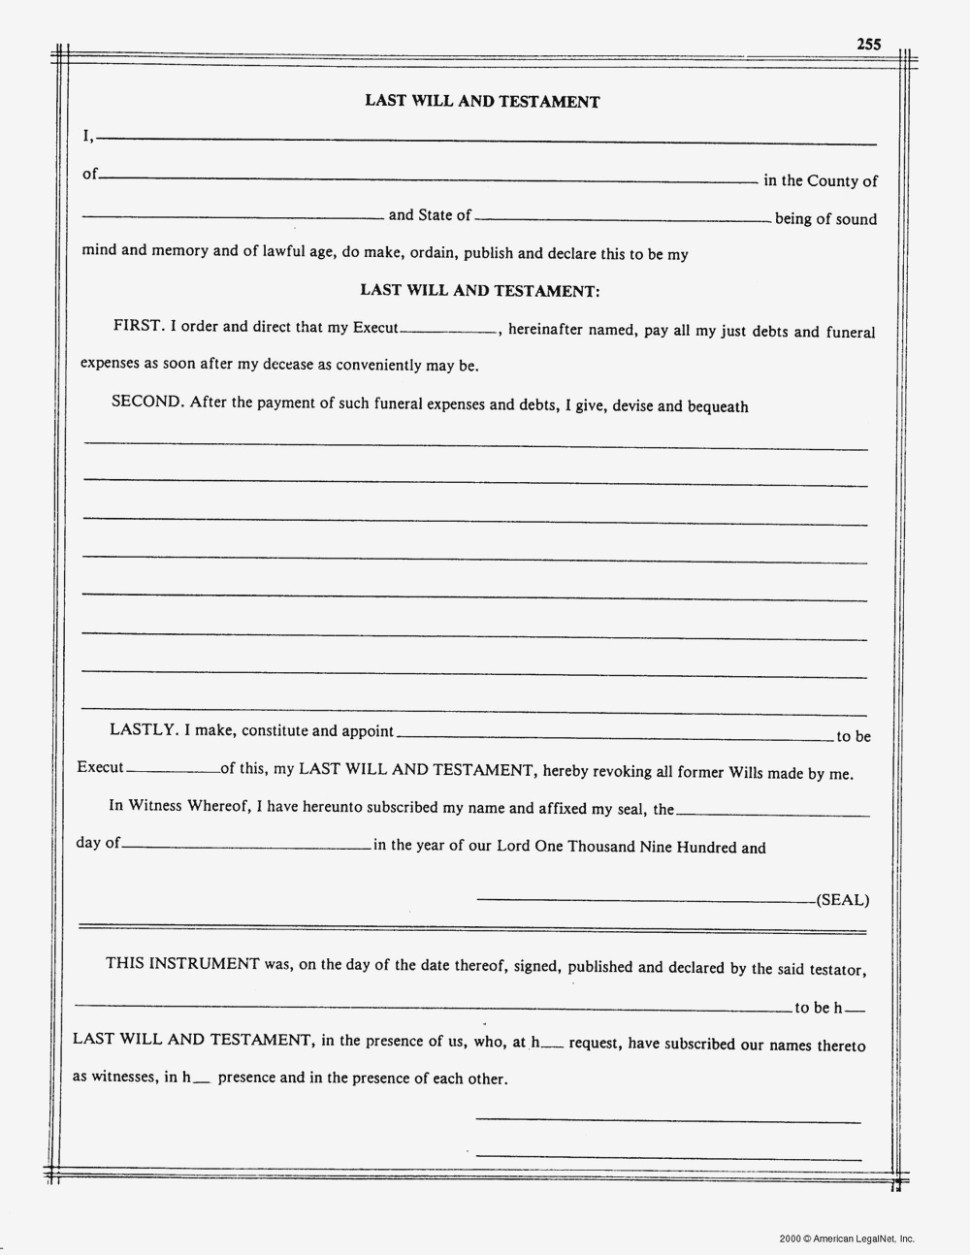 Free Printable Last Will And Testament Forms Nz | Resume Examples - Free Printable Will Forms